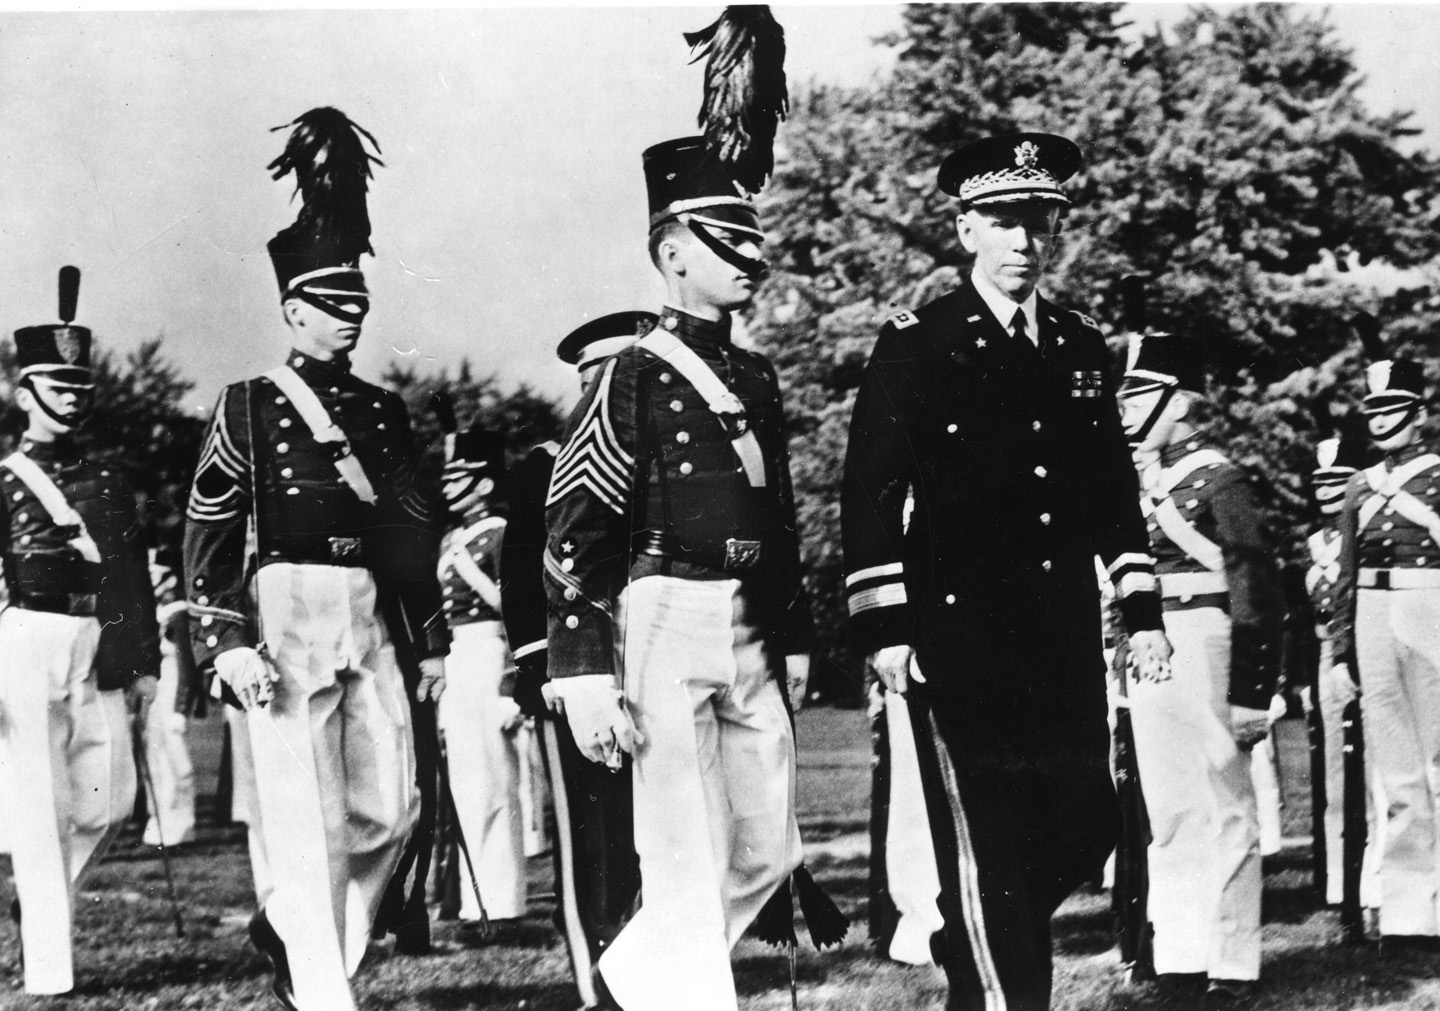 Marshall inspects smartly uniformed VMI cadets in 1940.